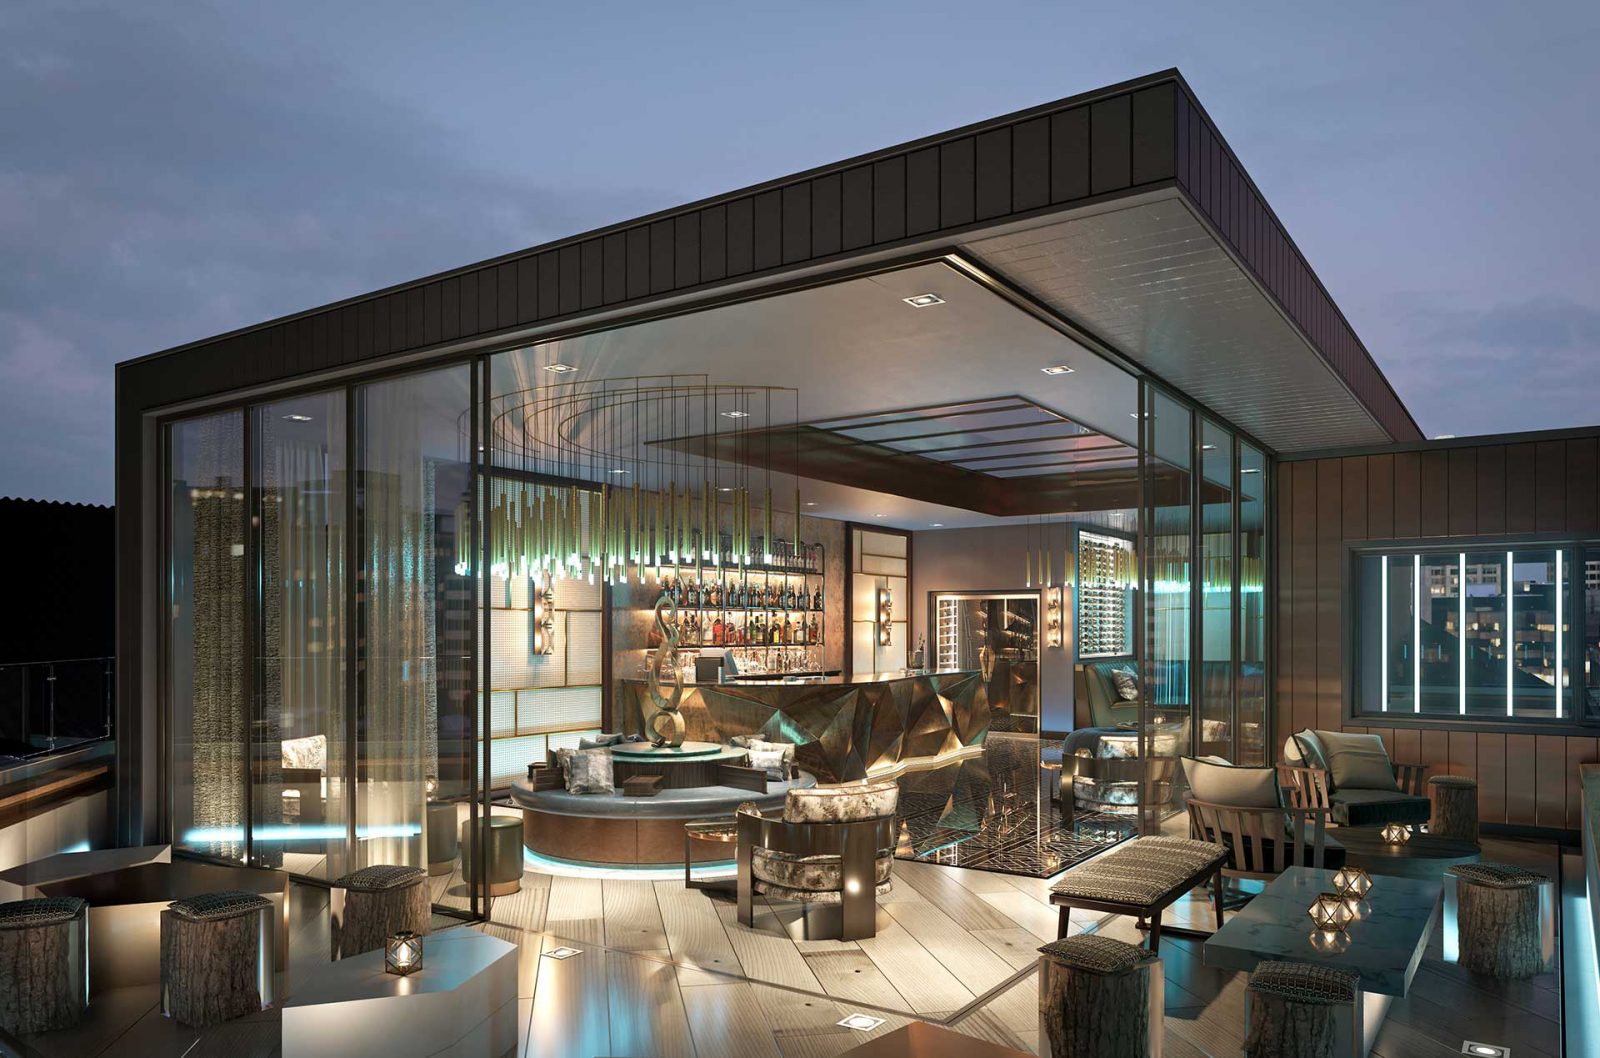 The proposed rooftop champagne bar. Credit: 42 The Calls